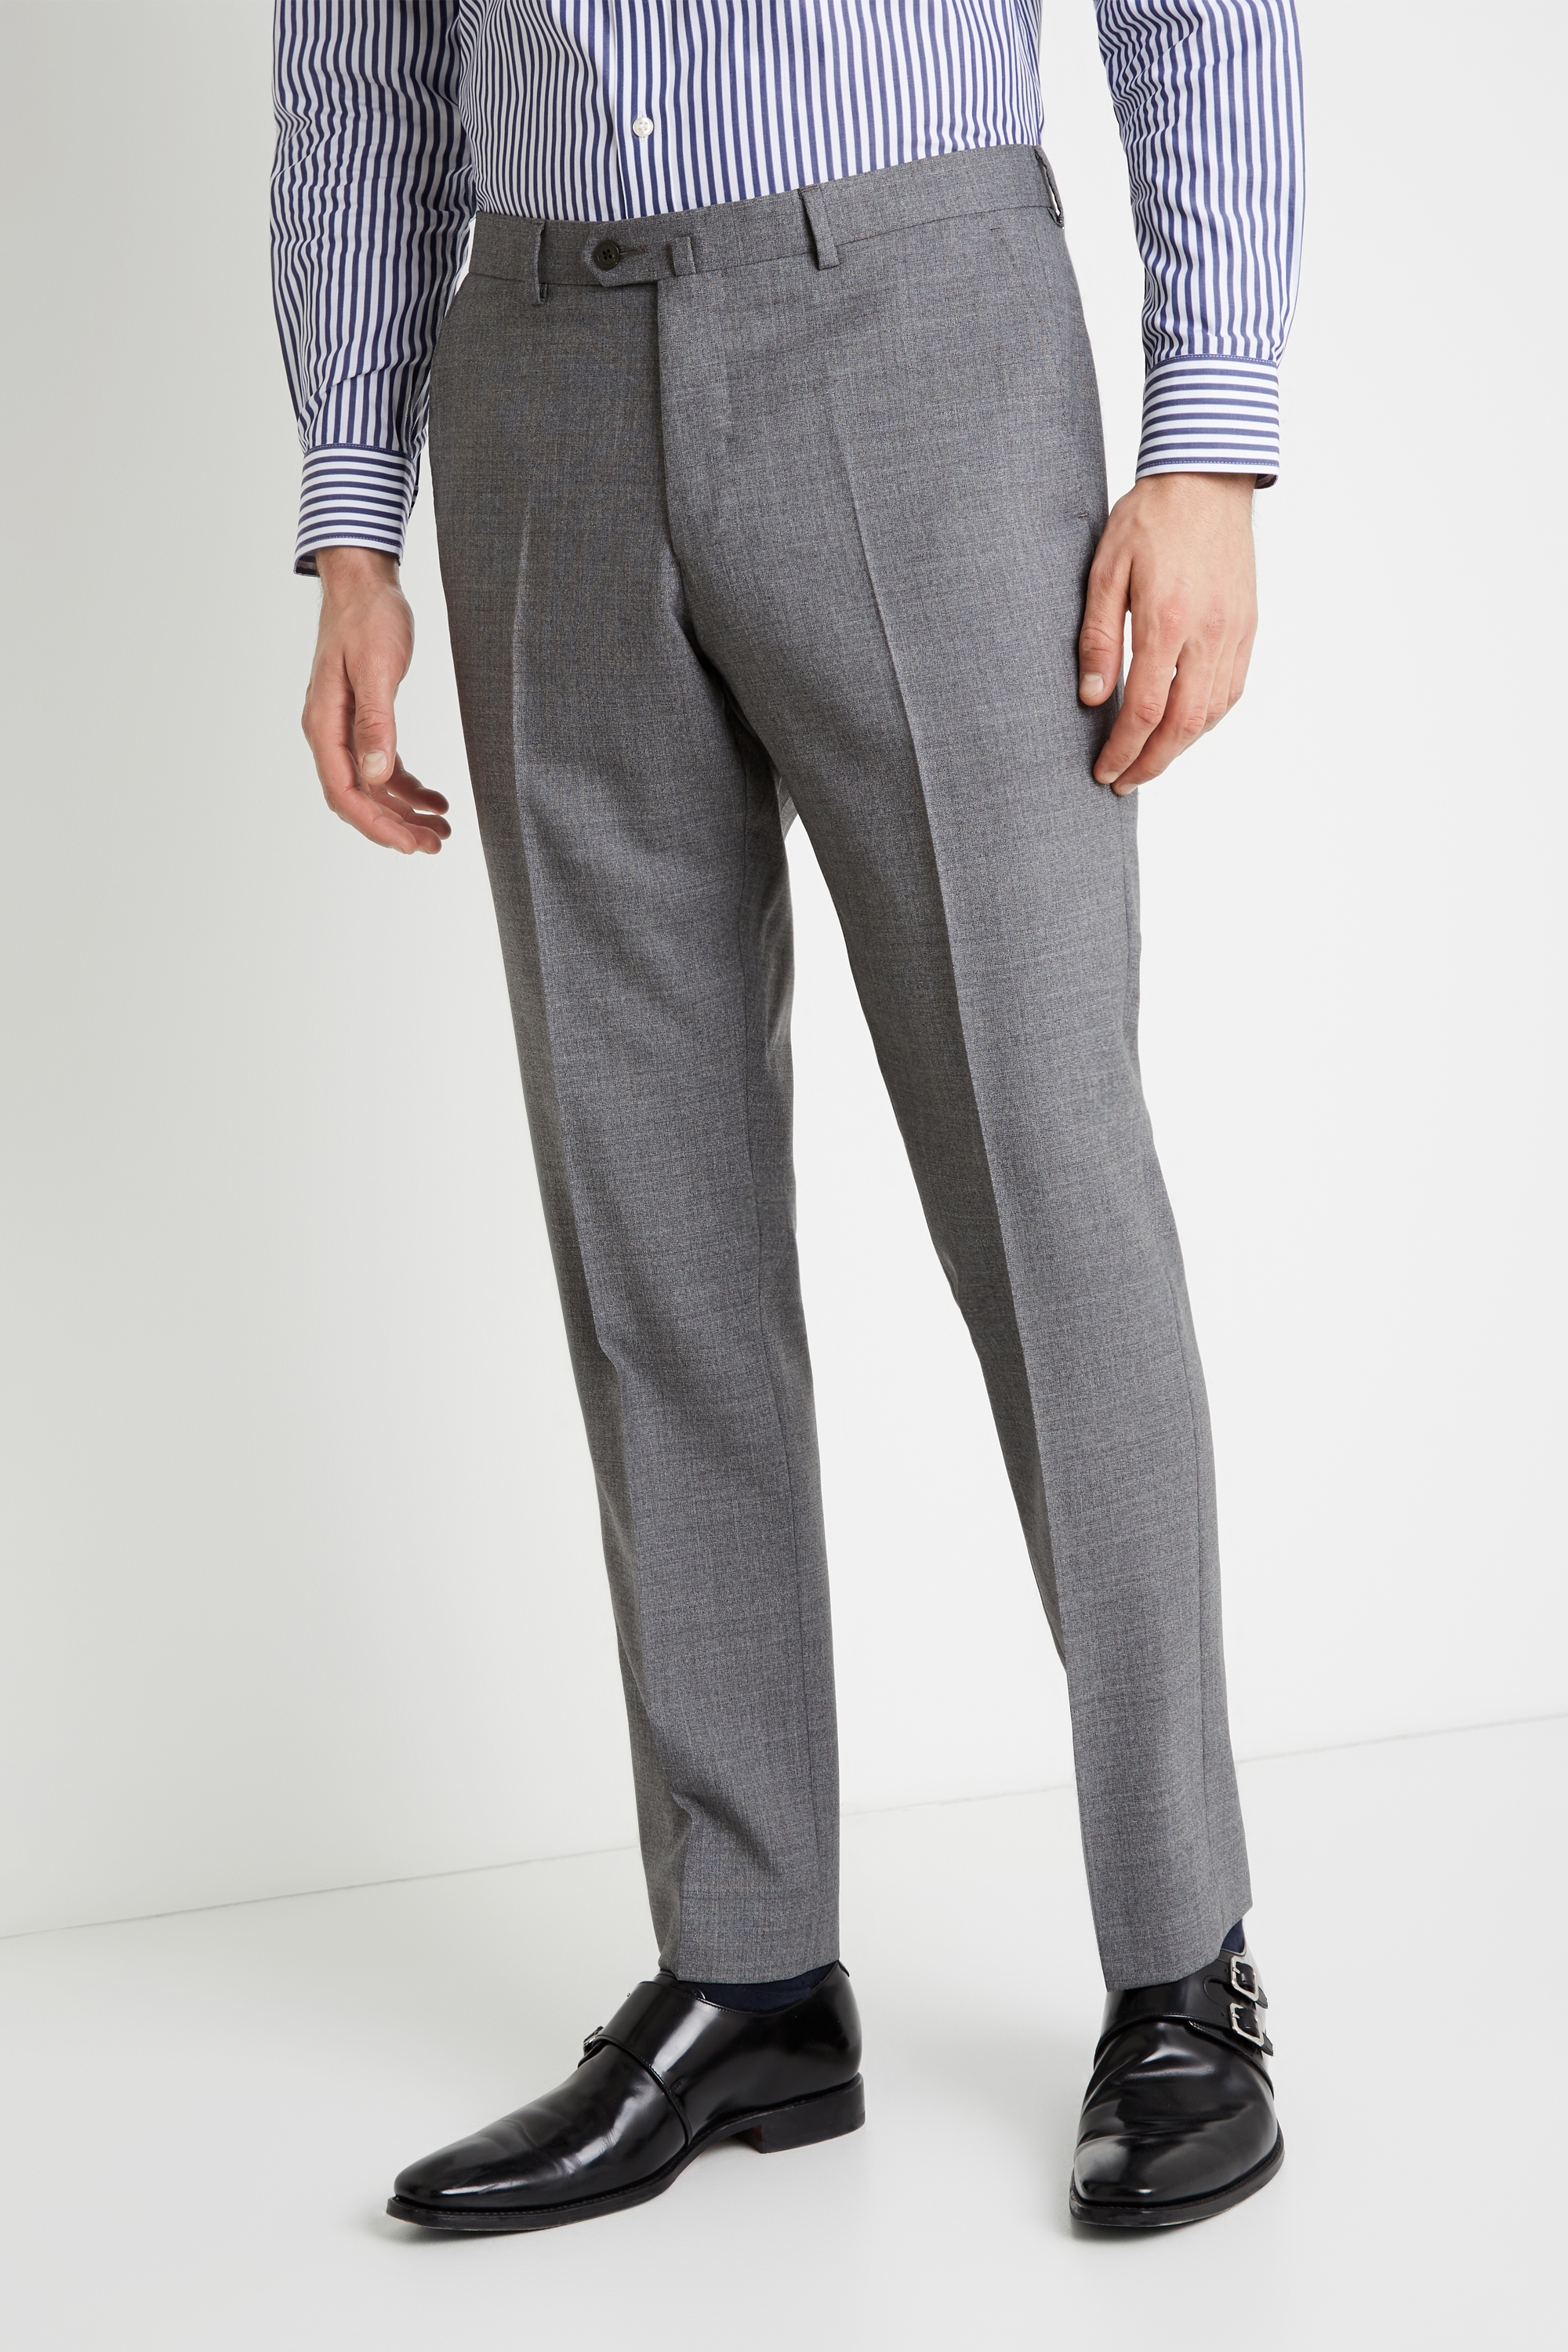 Savoy Taylors Guild Tailored Fit Grey Trousers